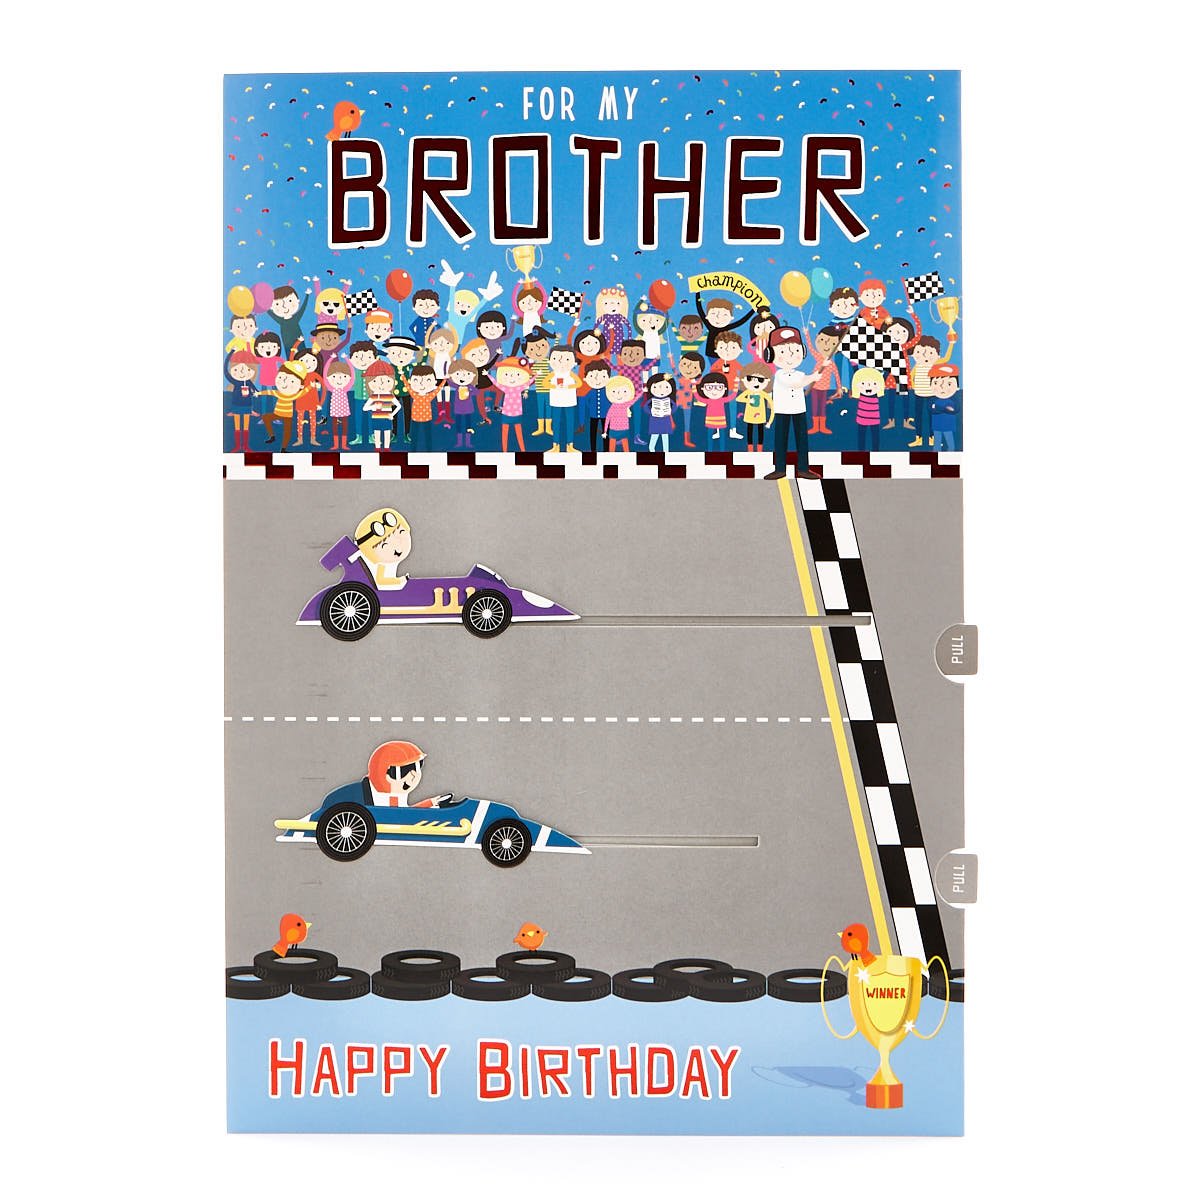 Signature Collection Birthday Card - Brother Race Cars